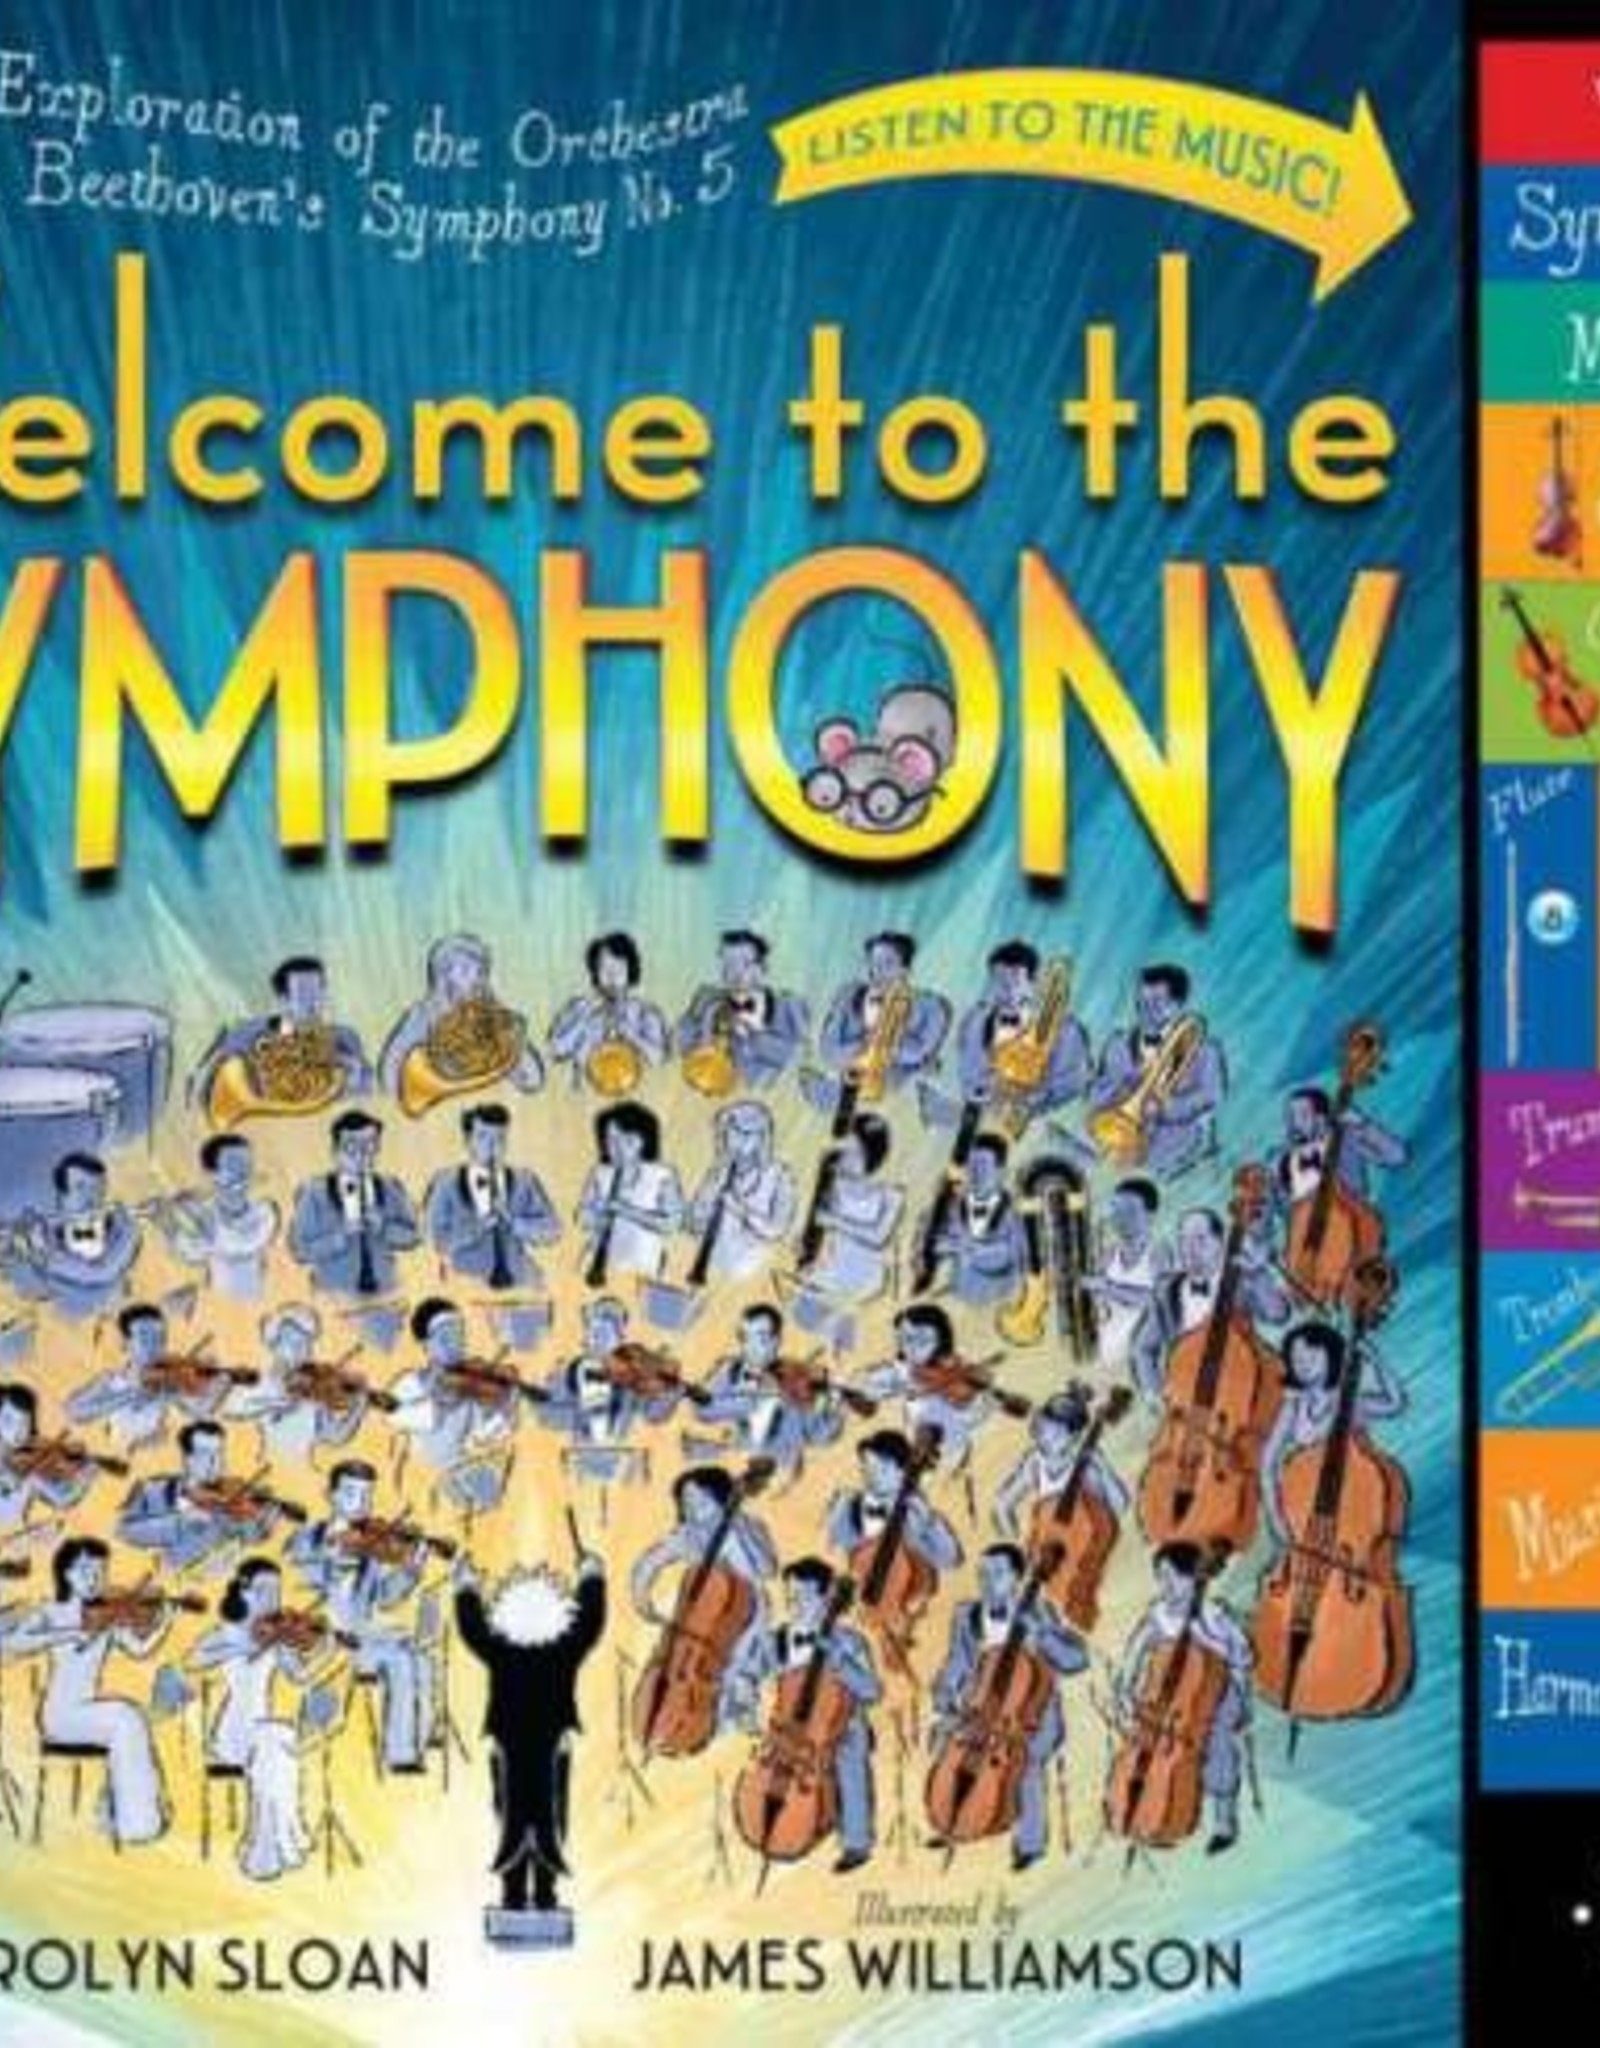 WELCOME TO THE SYMPHONY